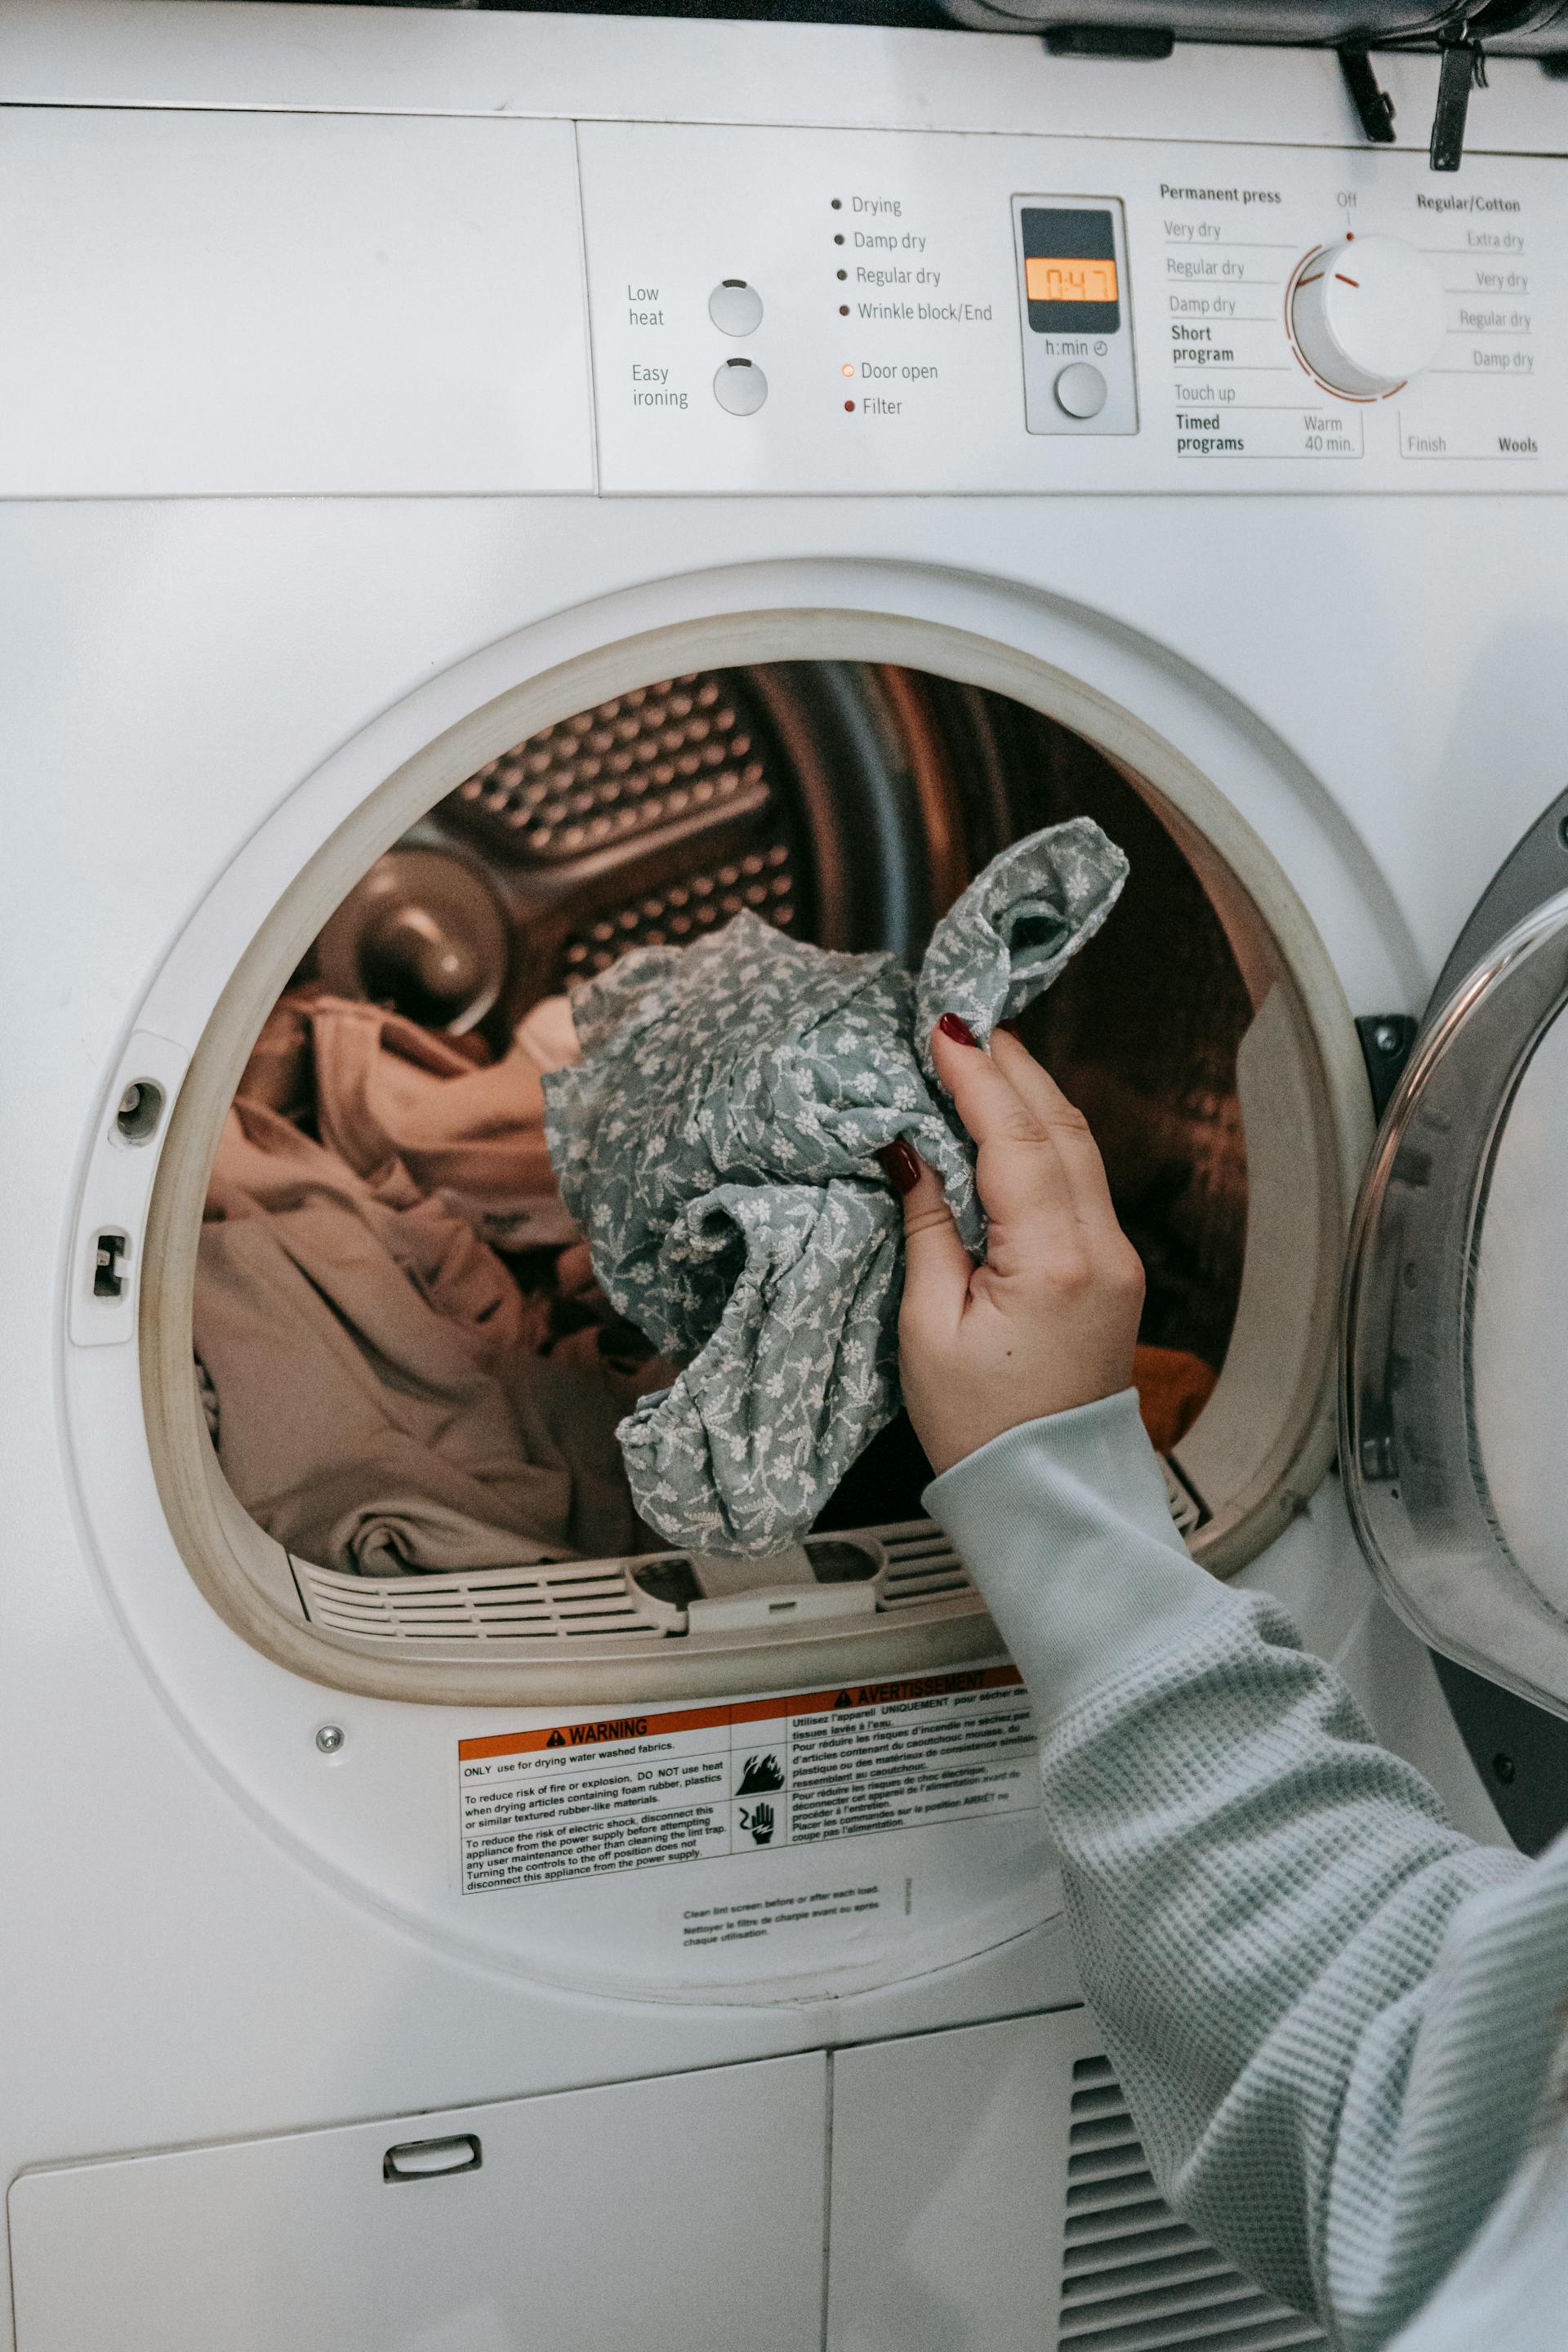 A person doing laundry | Source: Pexels